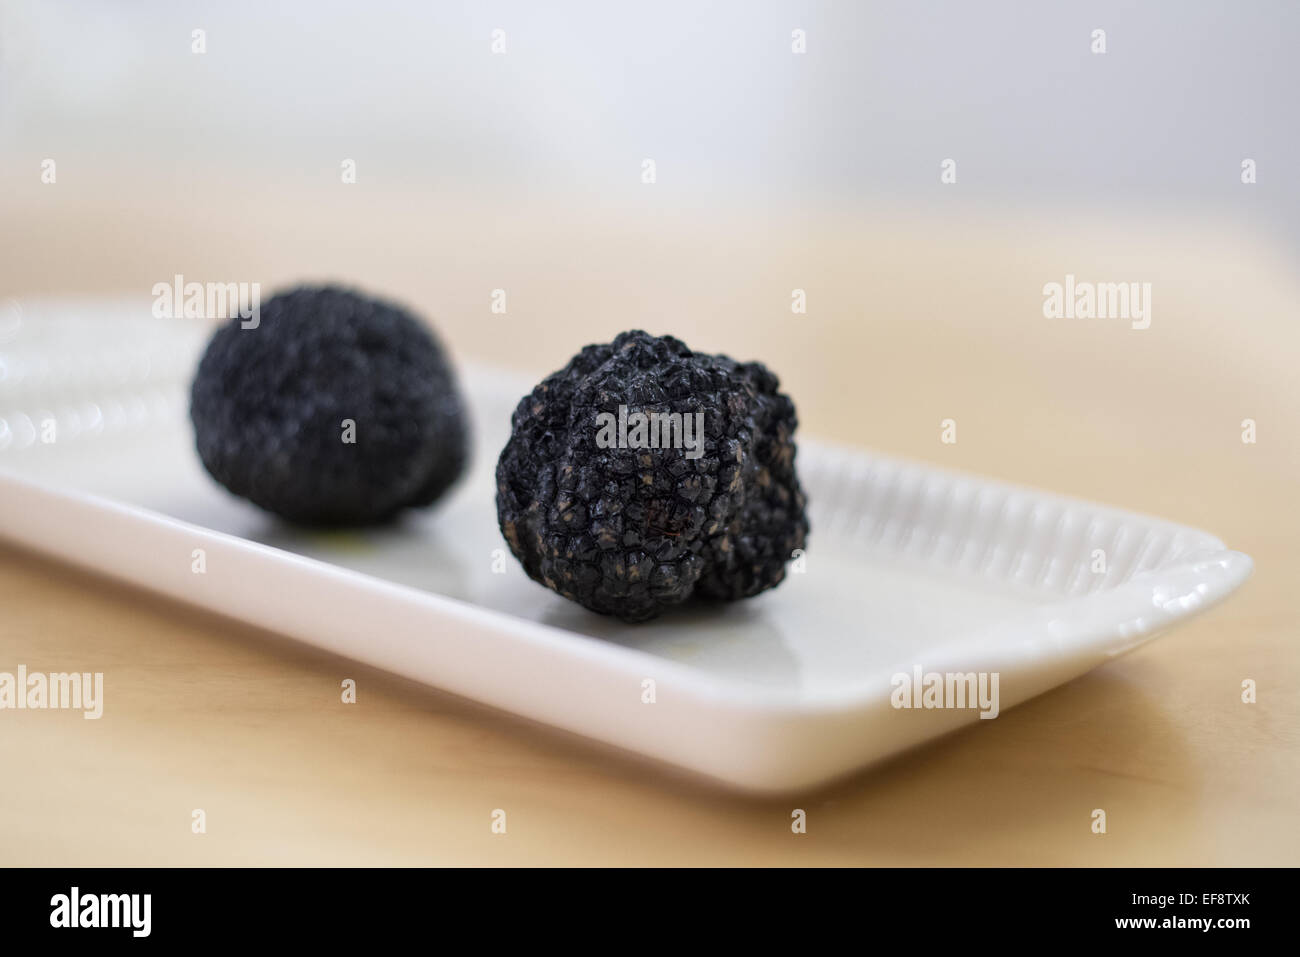 Two burgundy truffles on a plate Stock Photo